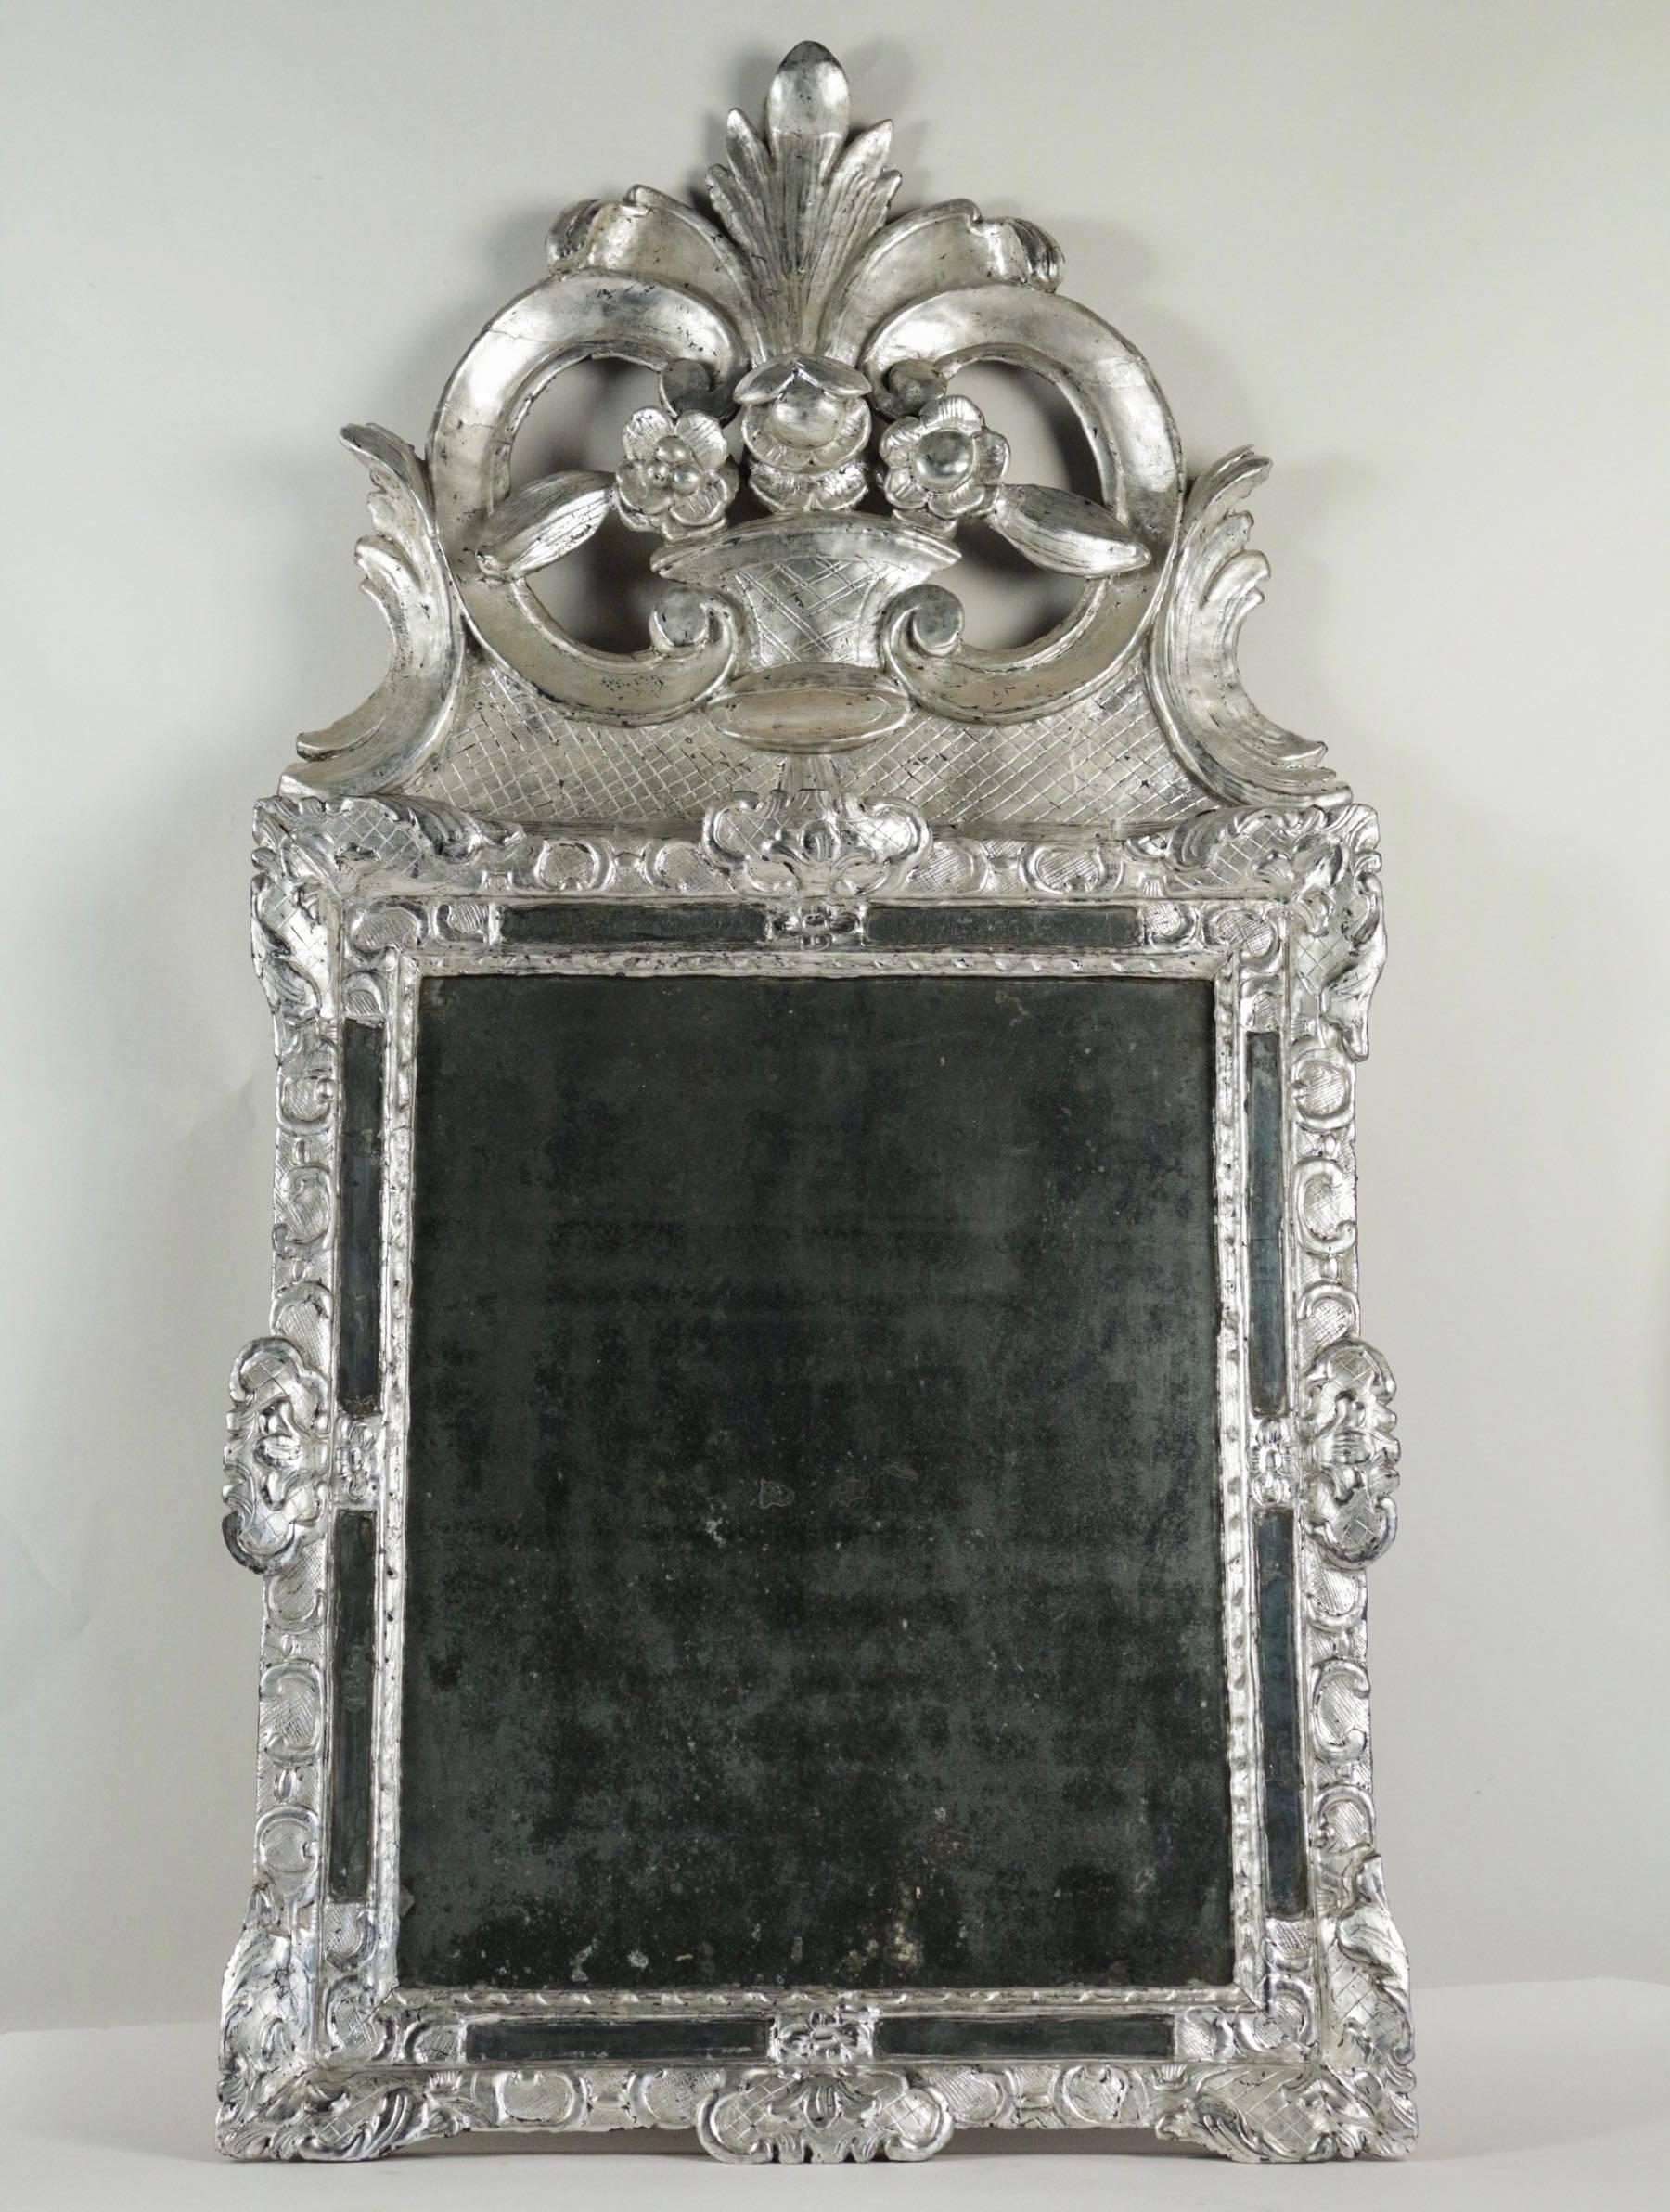 Gorgeous silvered wood mirror with original mercury glass. The hand-carved frame representing Berain decor style. Hand-carved front top.
French Louis XIV period, early-18h century, circa 1700.